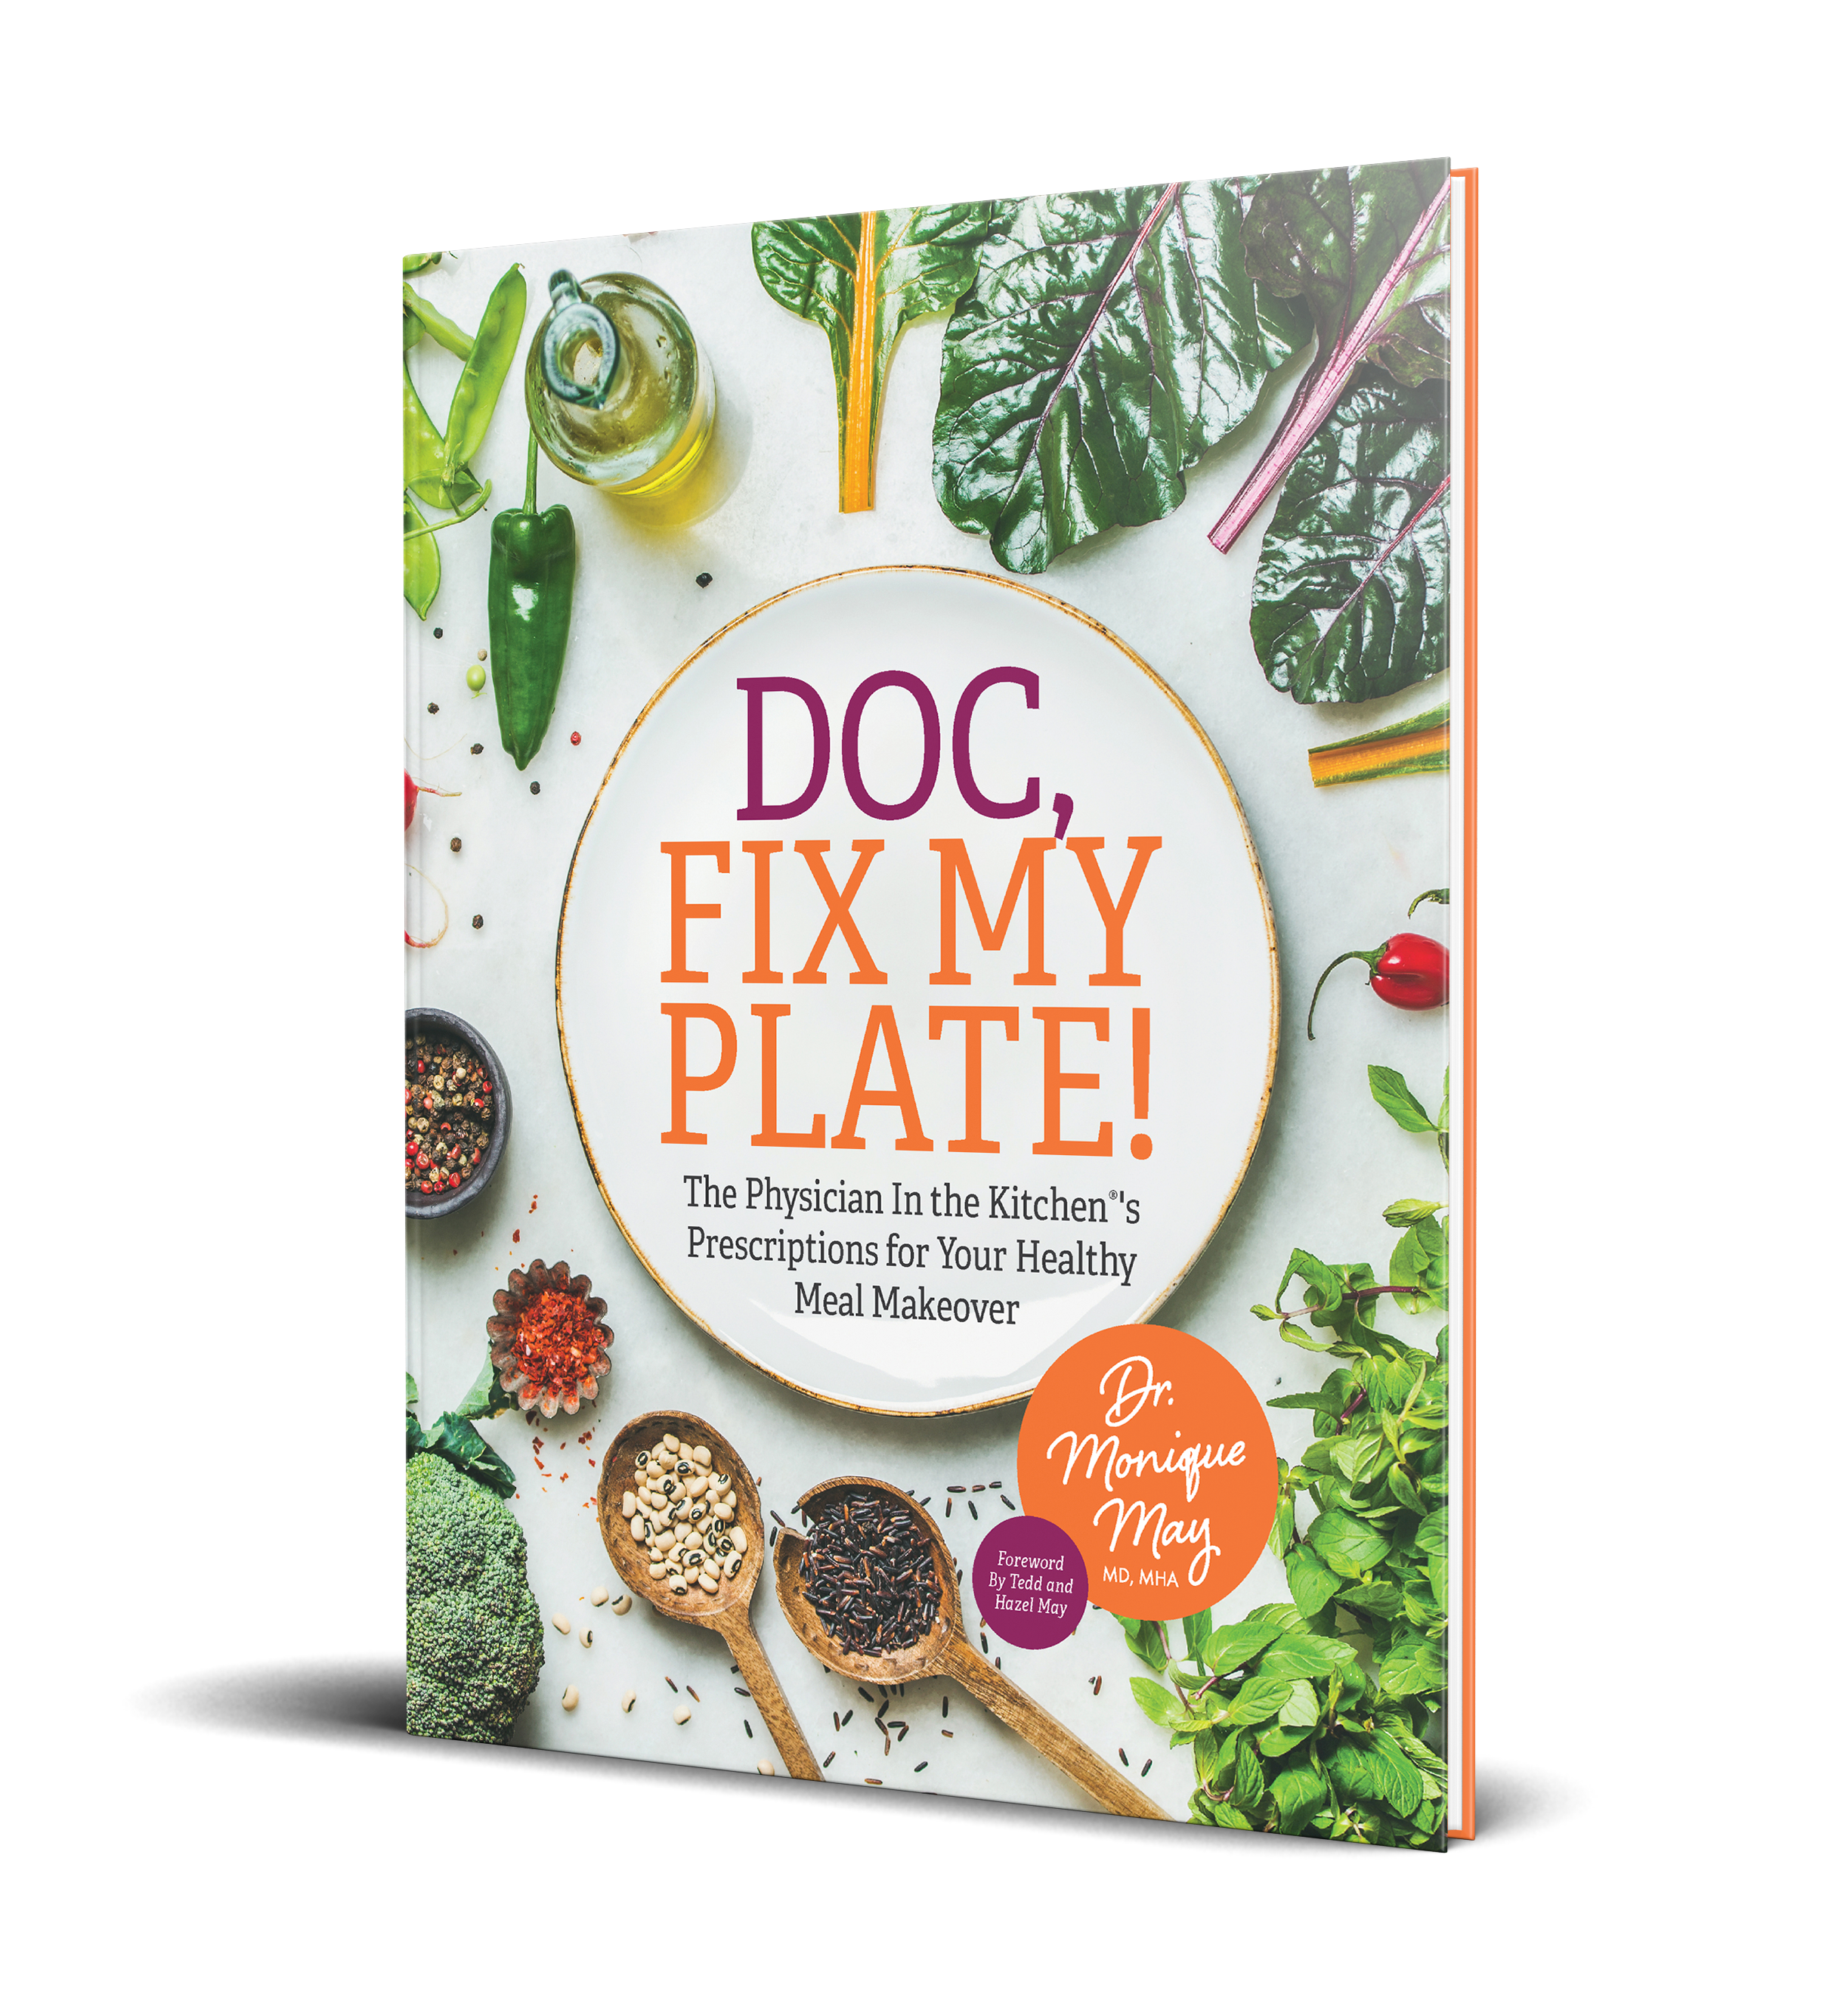 Physician and Bestselling Author Releases Cookbook Promoting a Vegan Diet